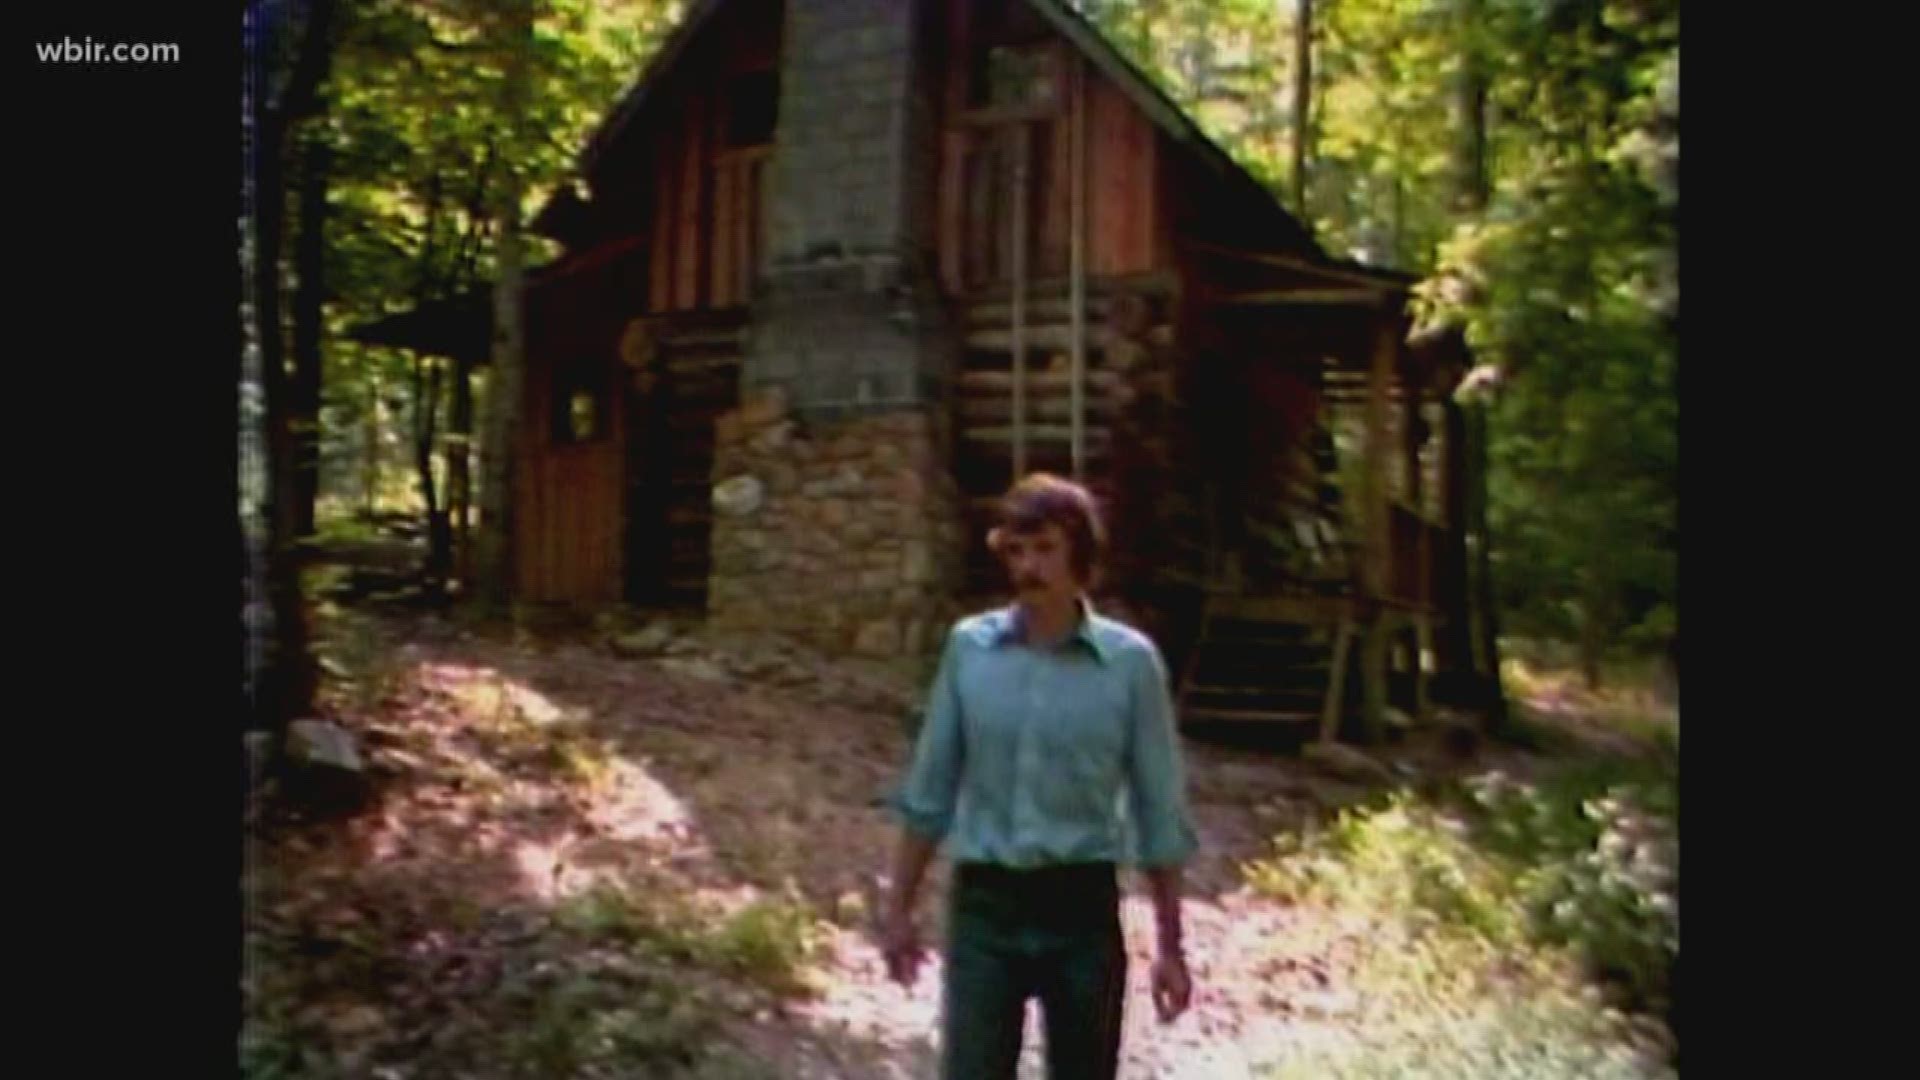 WBIR Archive: A legally blind musician in East Tennessee wrote dozens of songs about the life he loves so much in the mountains.